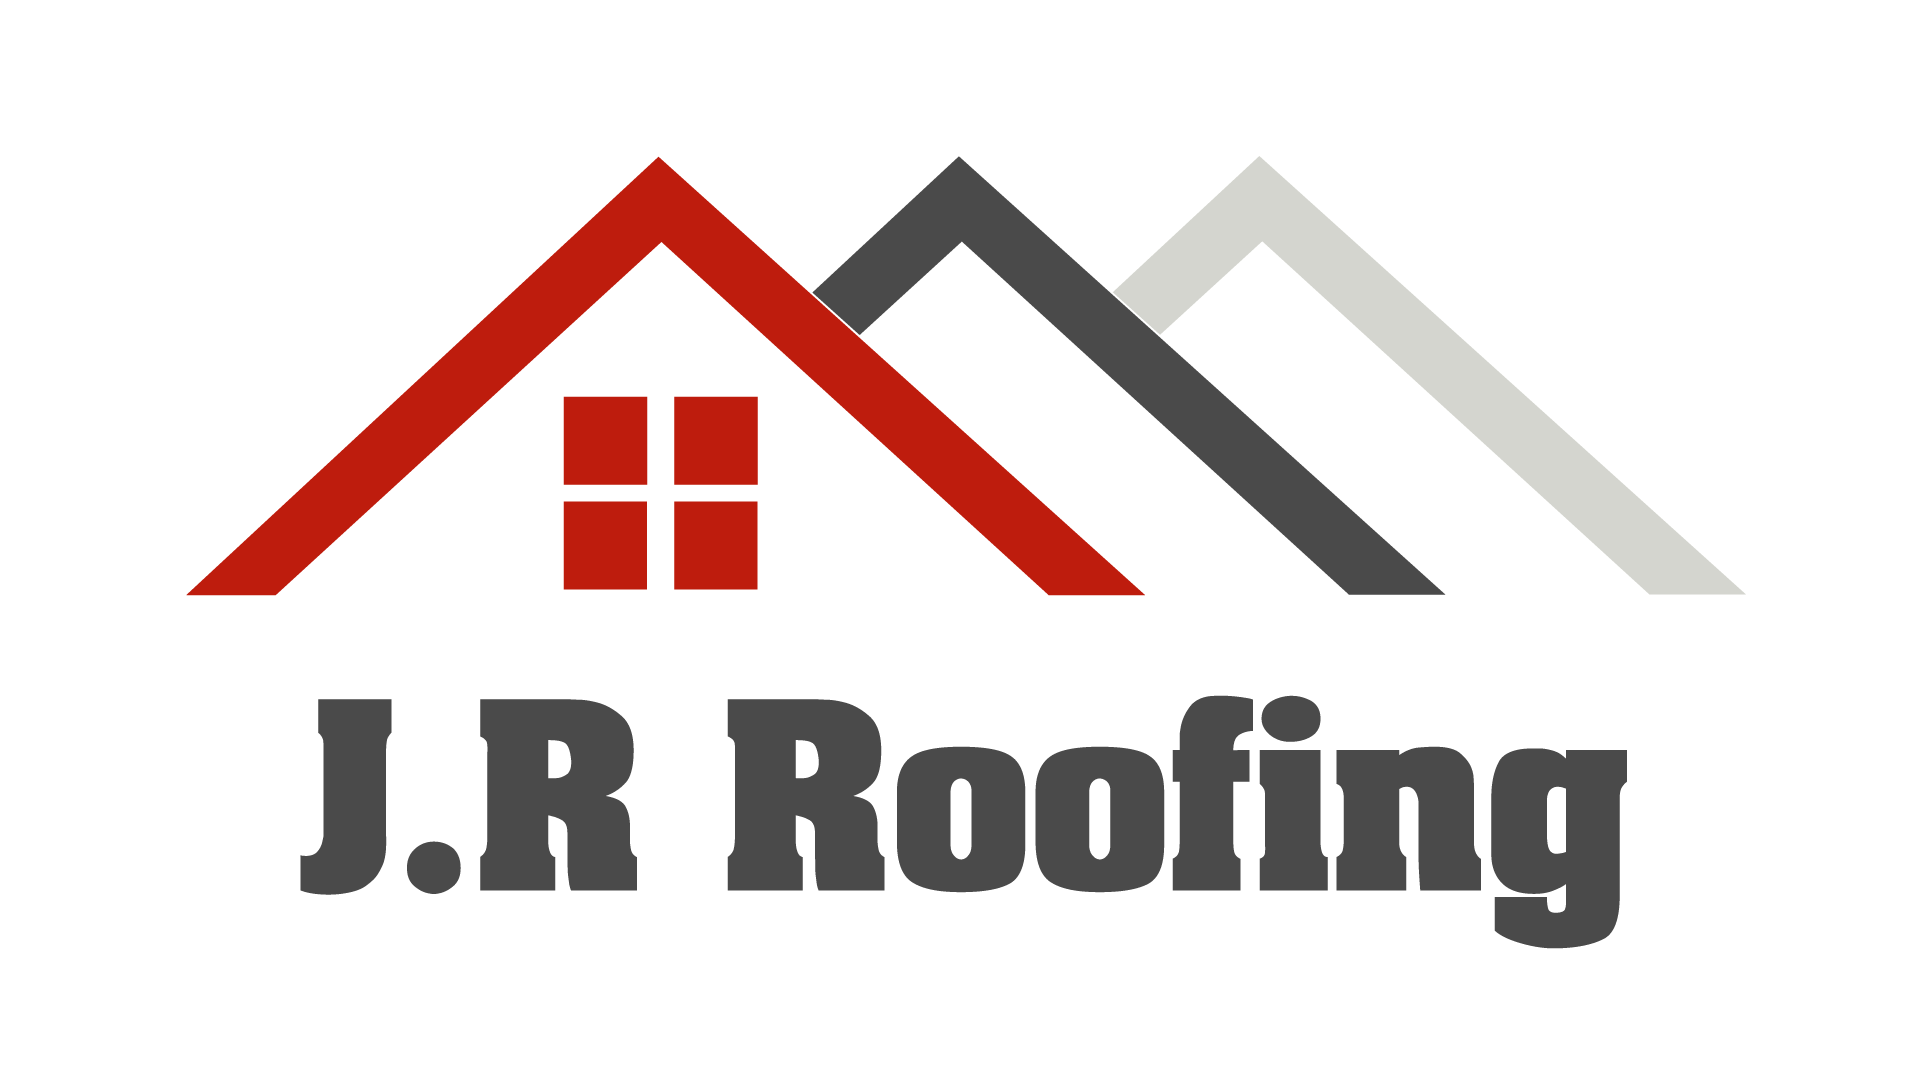 J.R Roofing